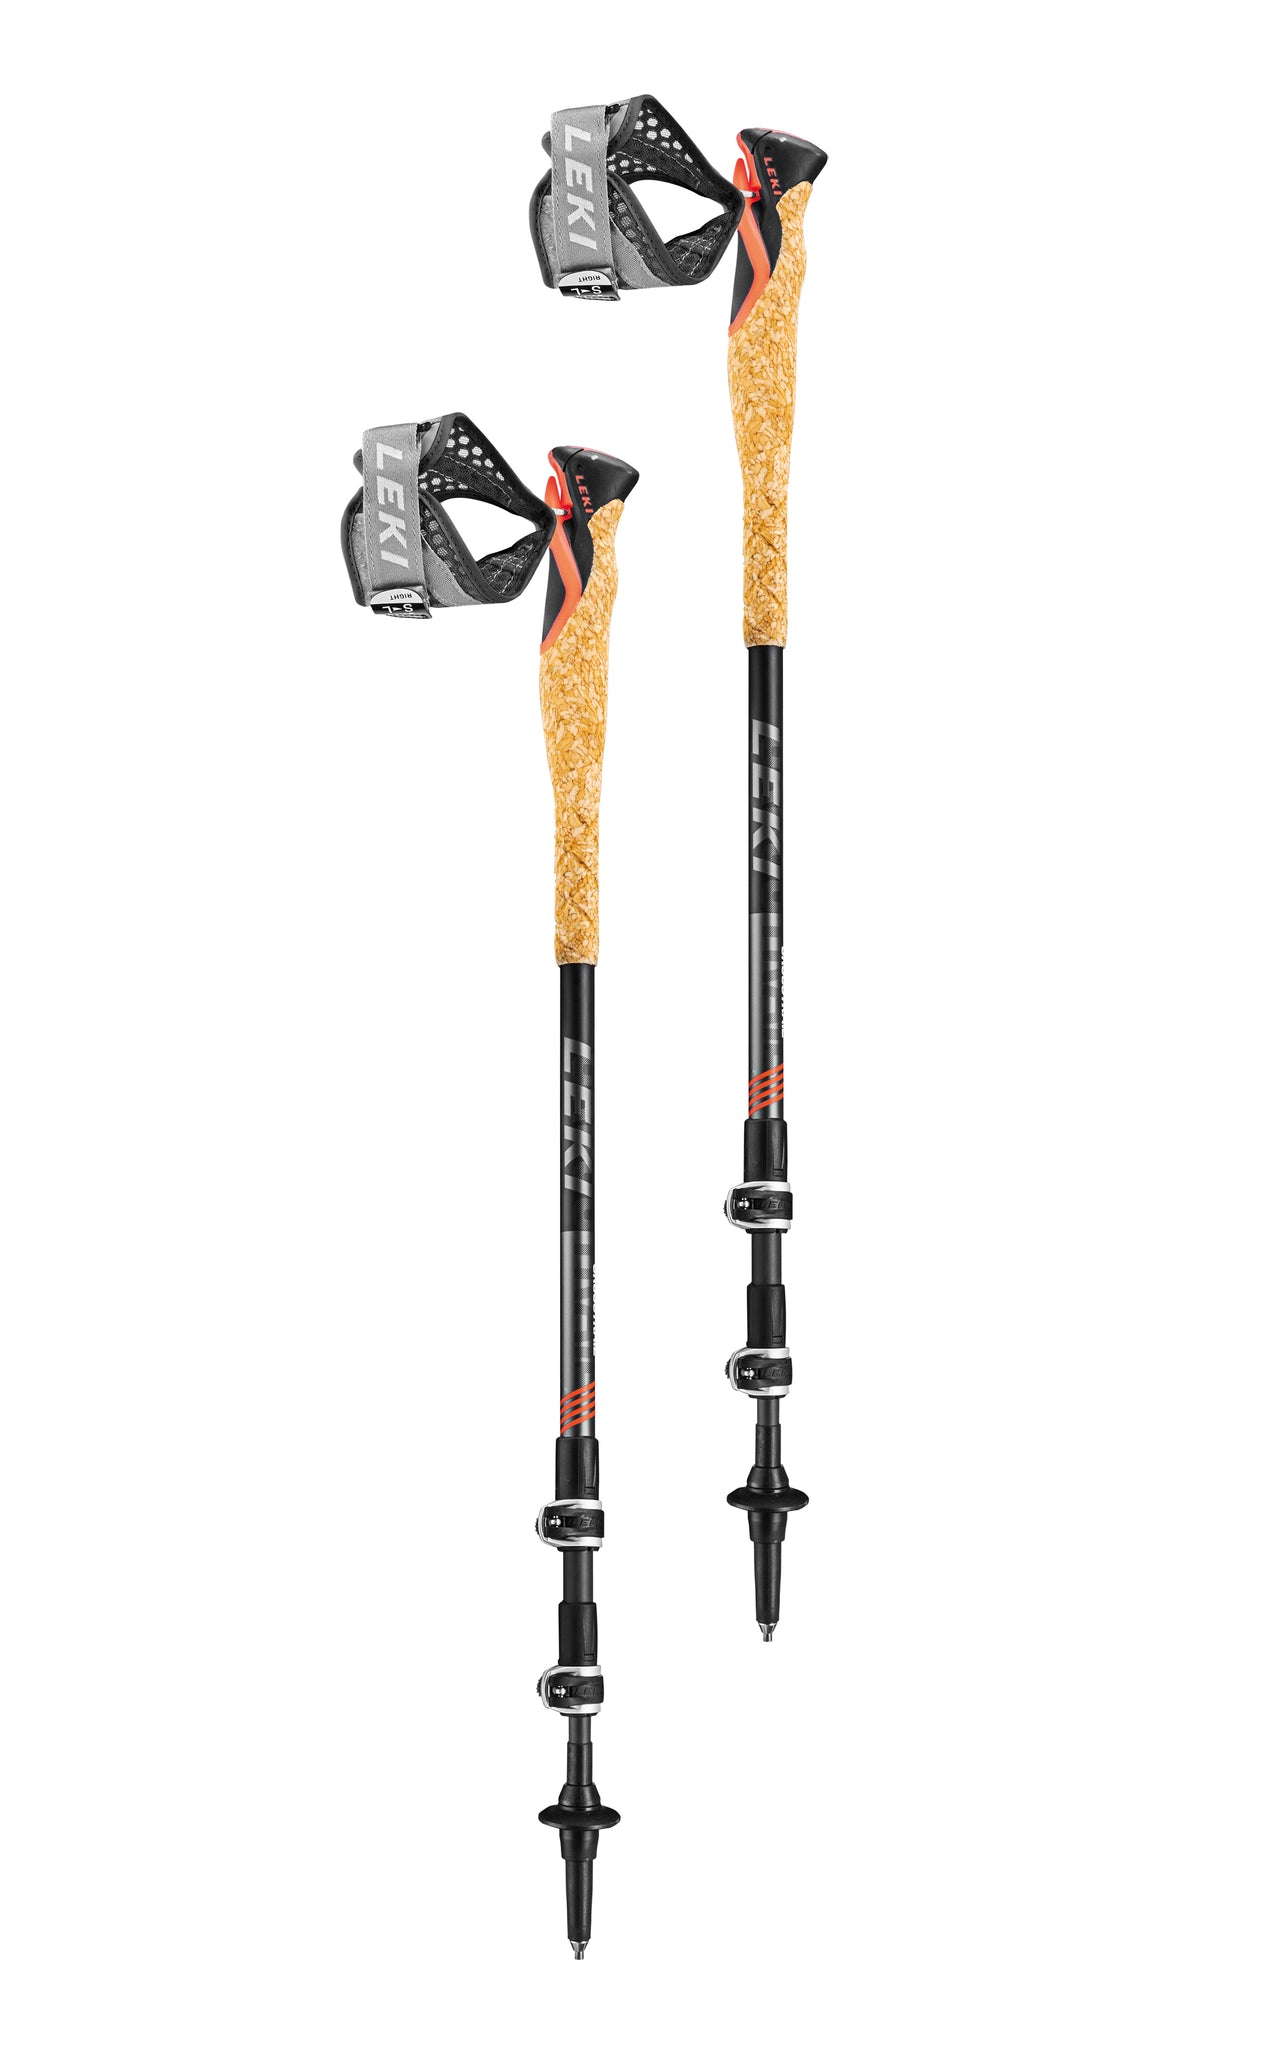 CROSS TRAIL 3 CARBON COMPACT